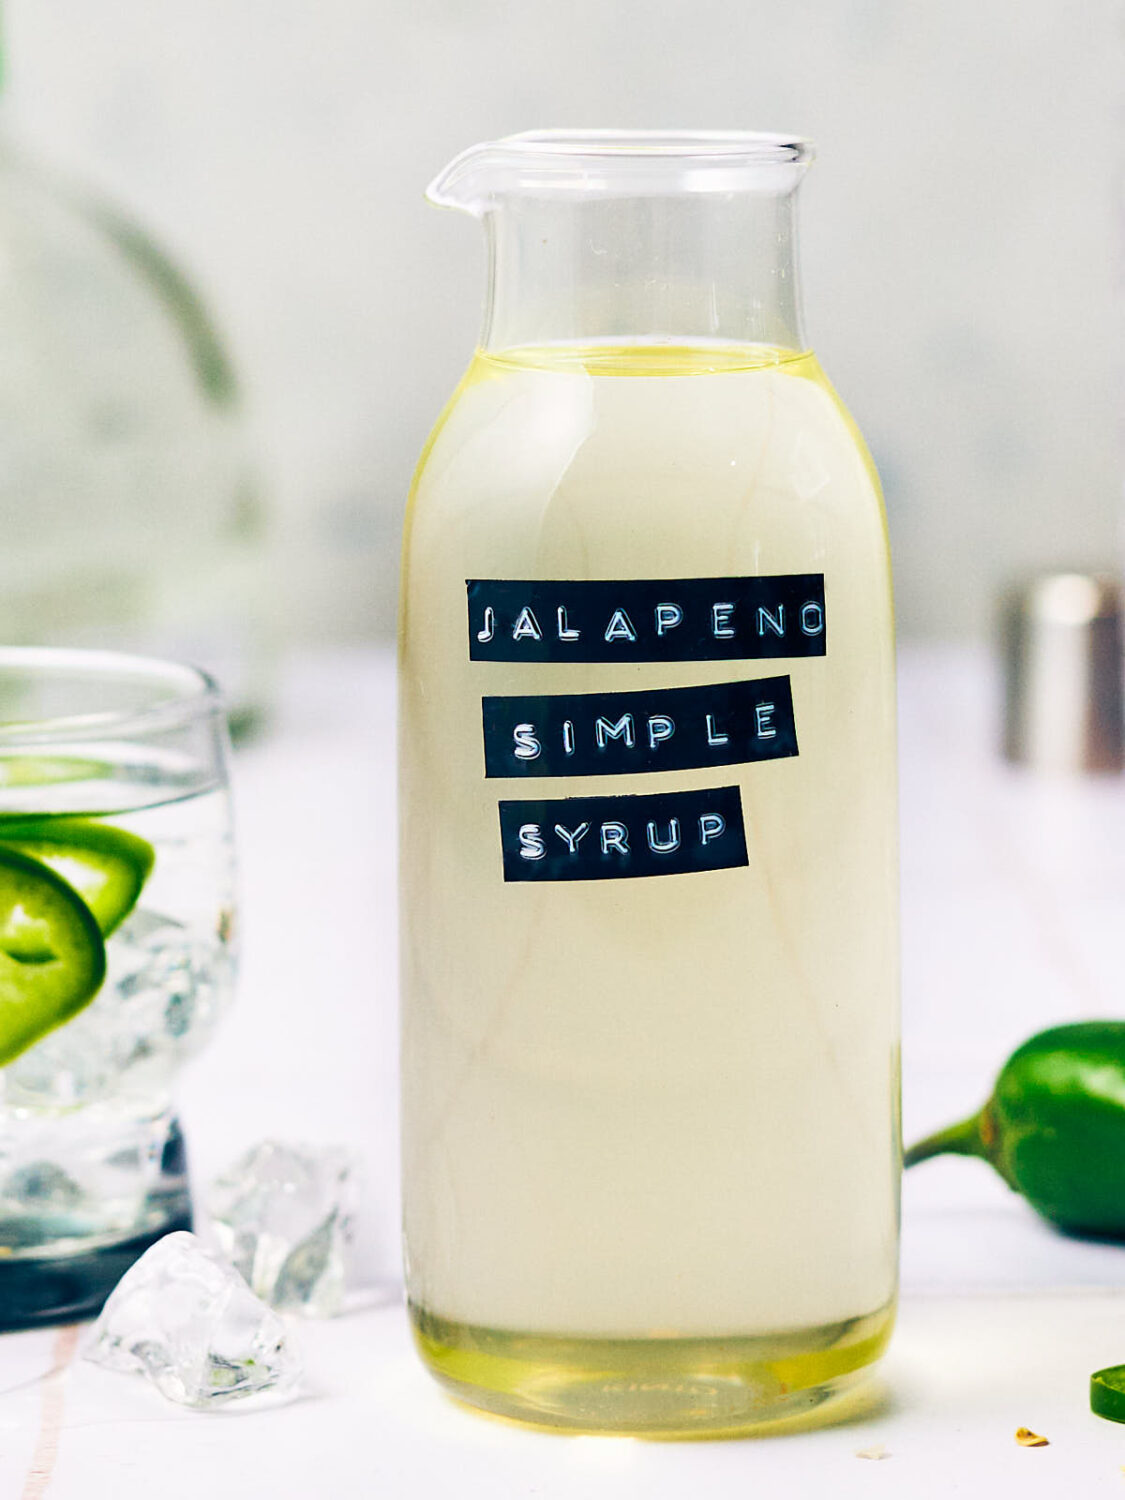 The best Jalapeño Simple Syrup in a glass jar.